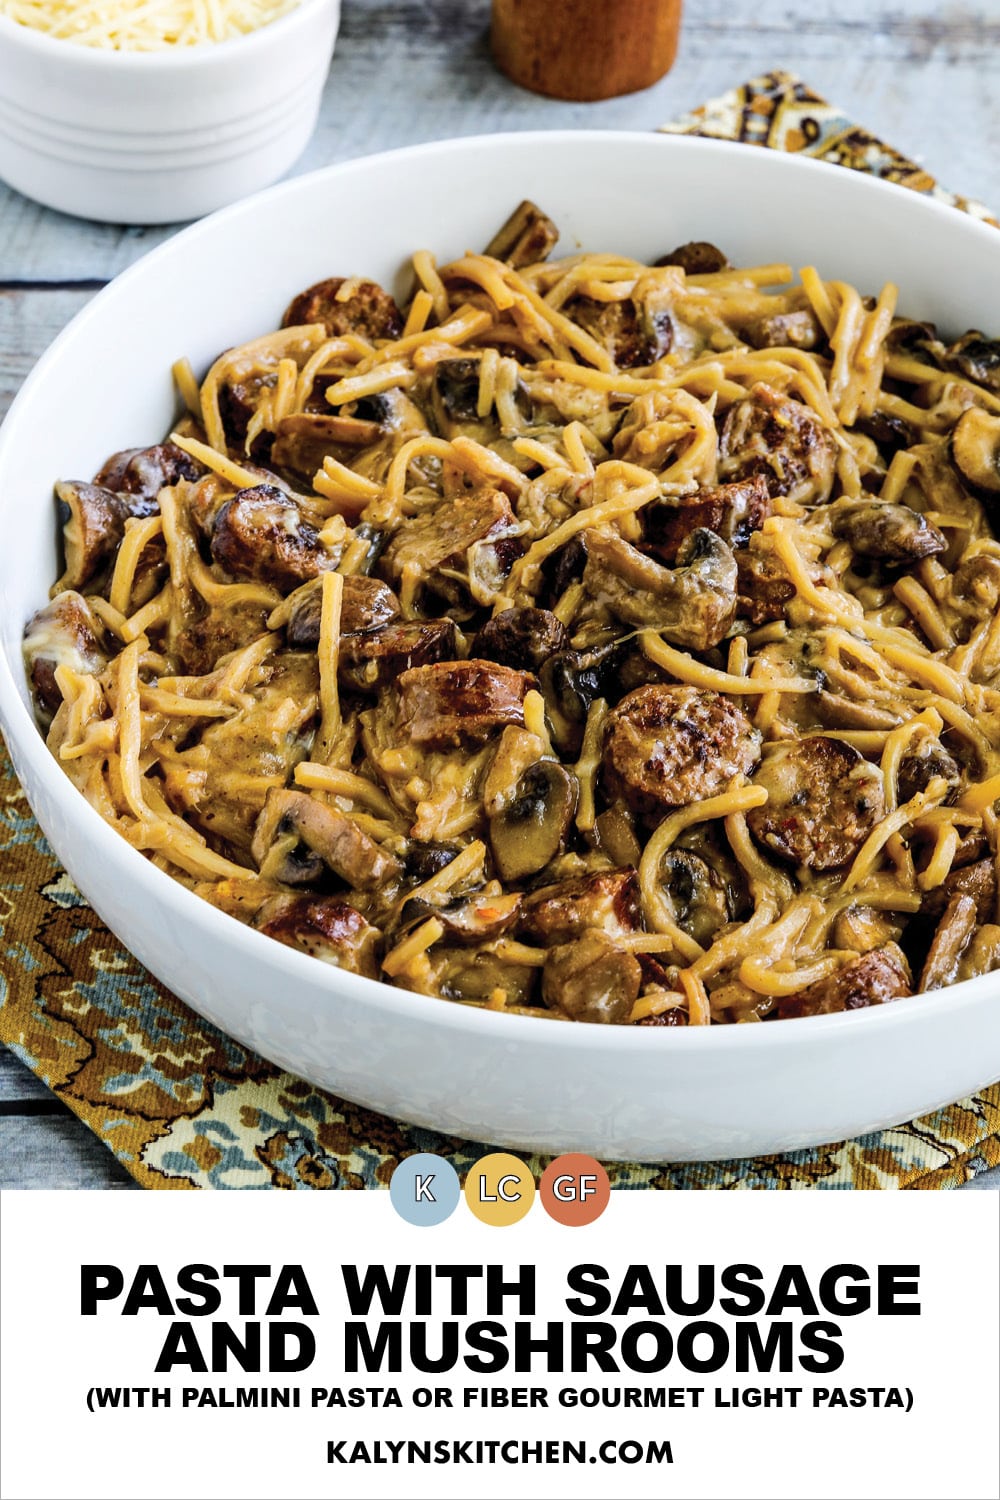 Pinterest image of Pasta with Sausage and Mushrooms